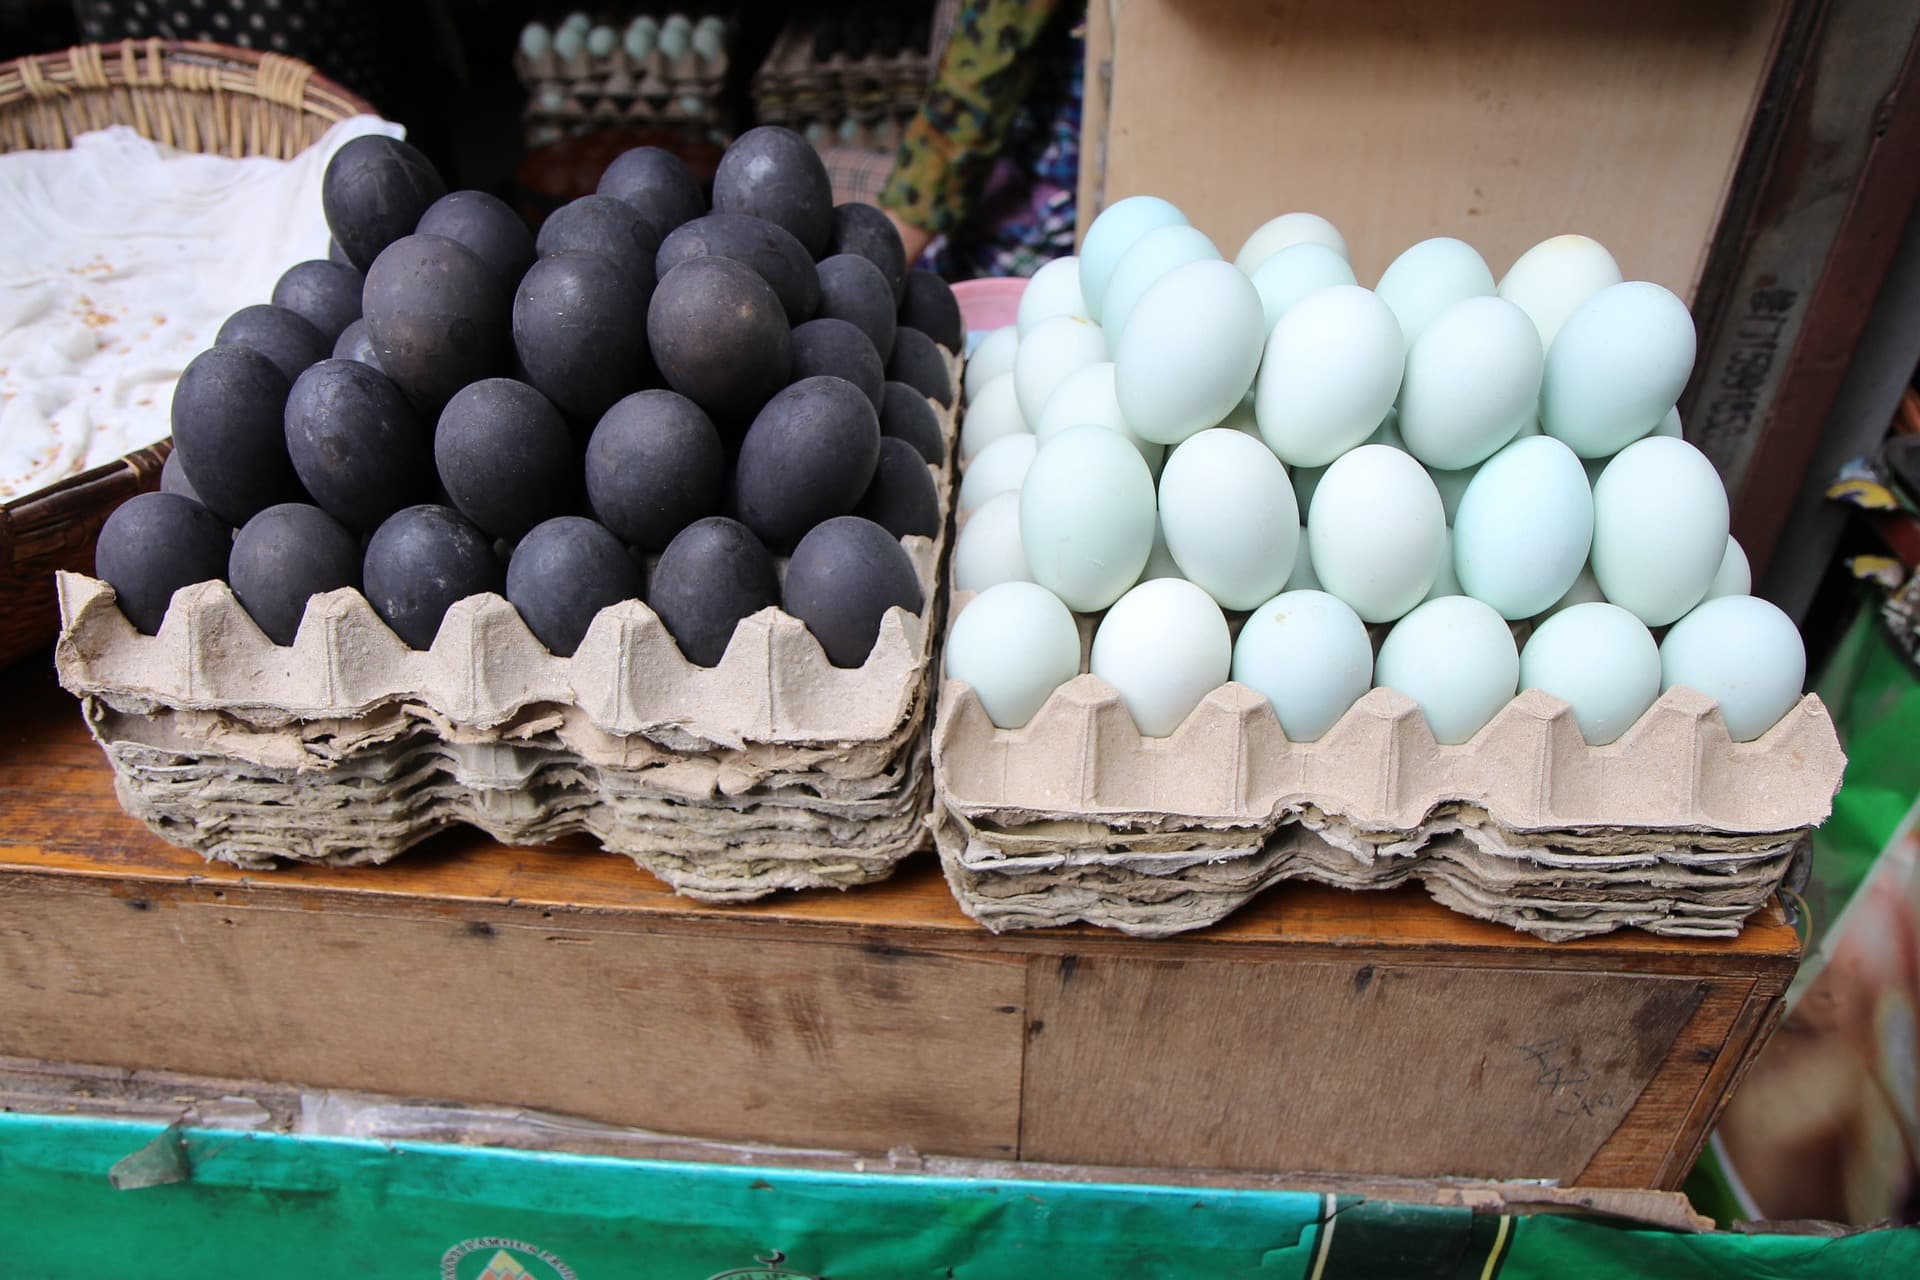 century eggs and normal eggs